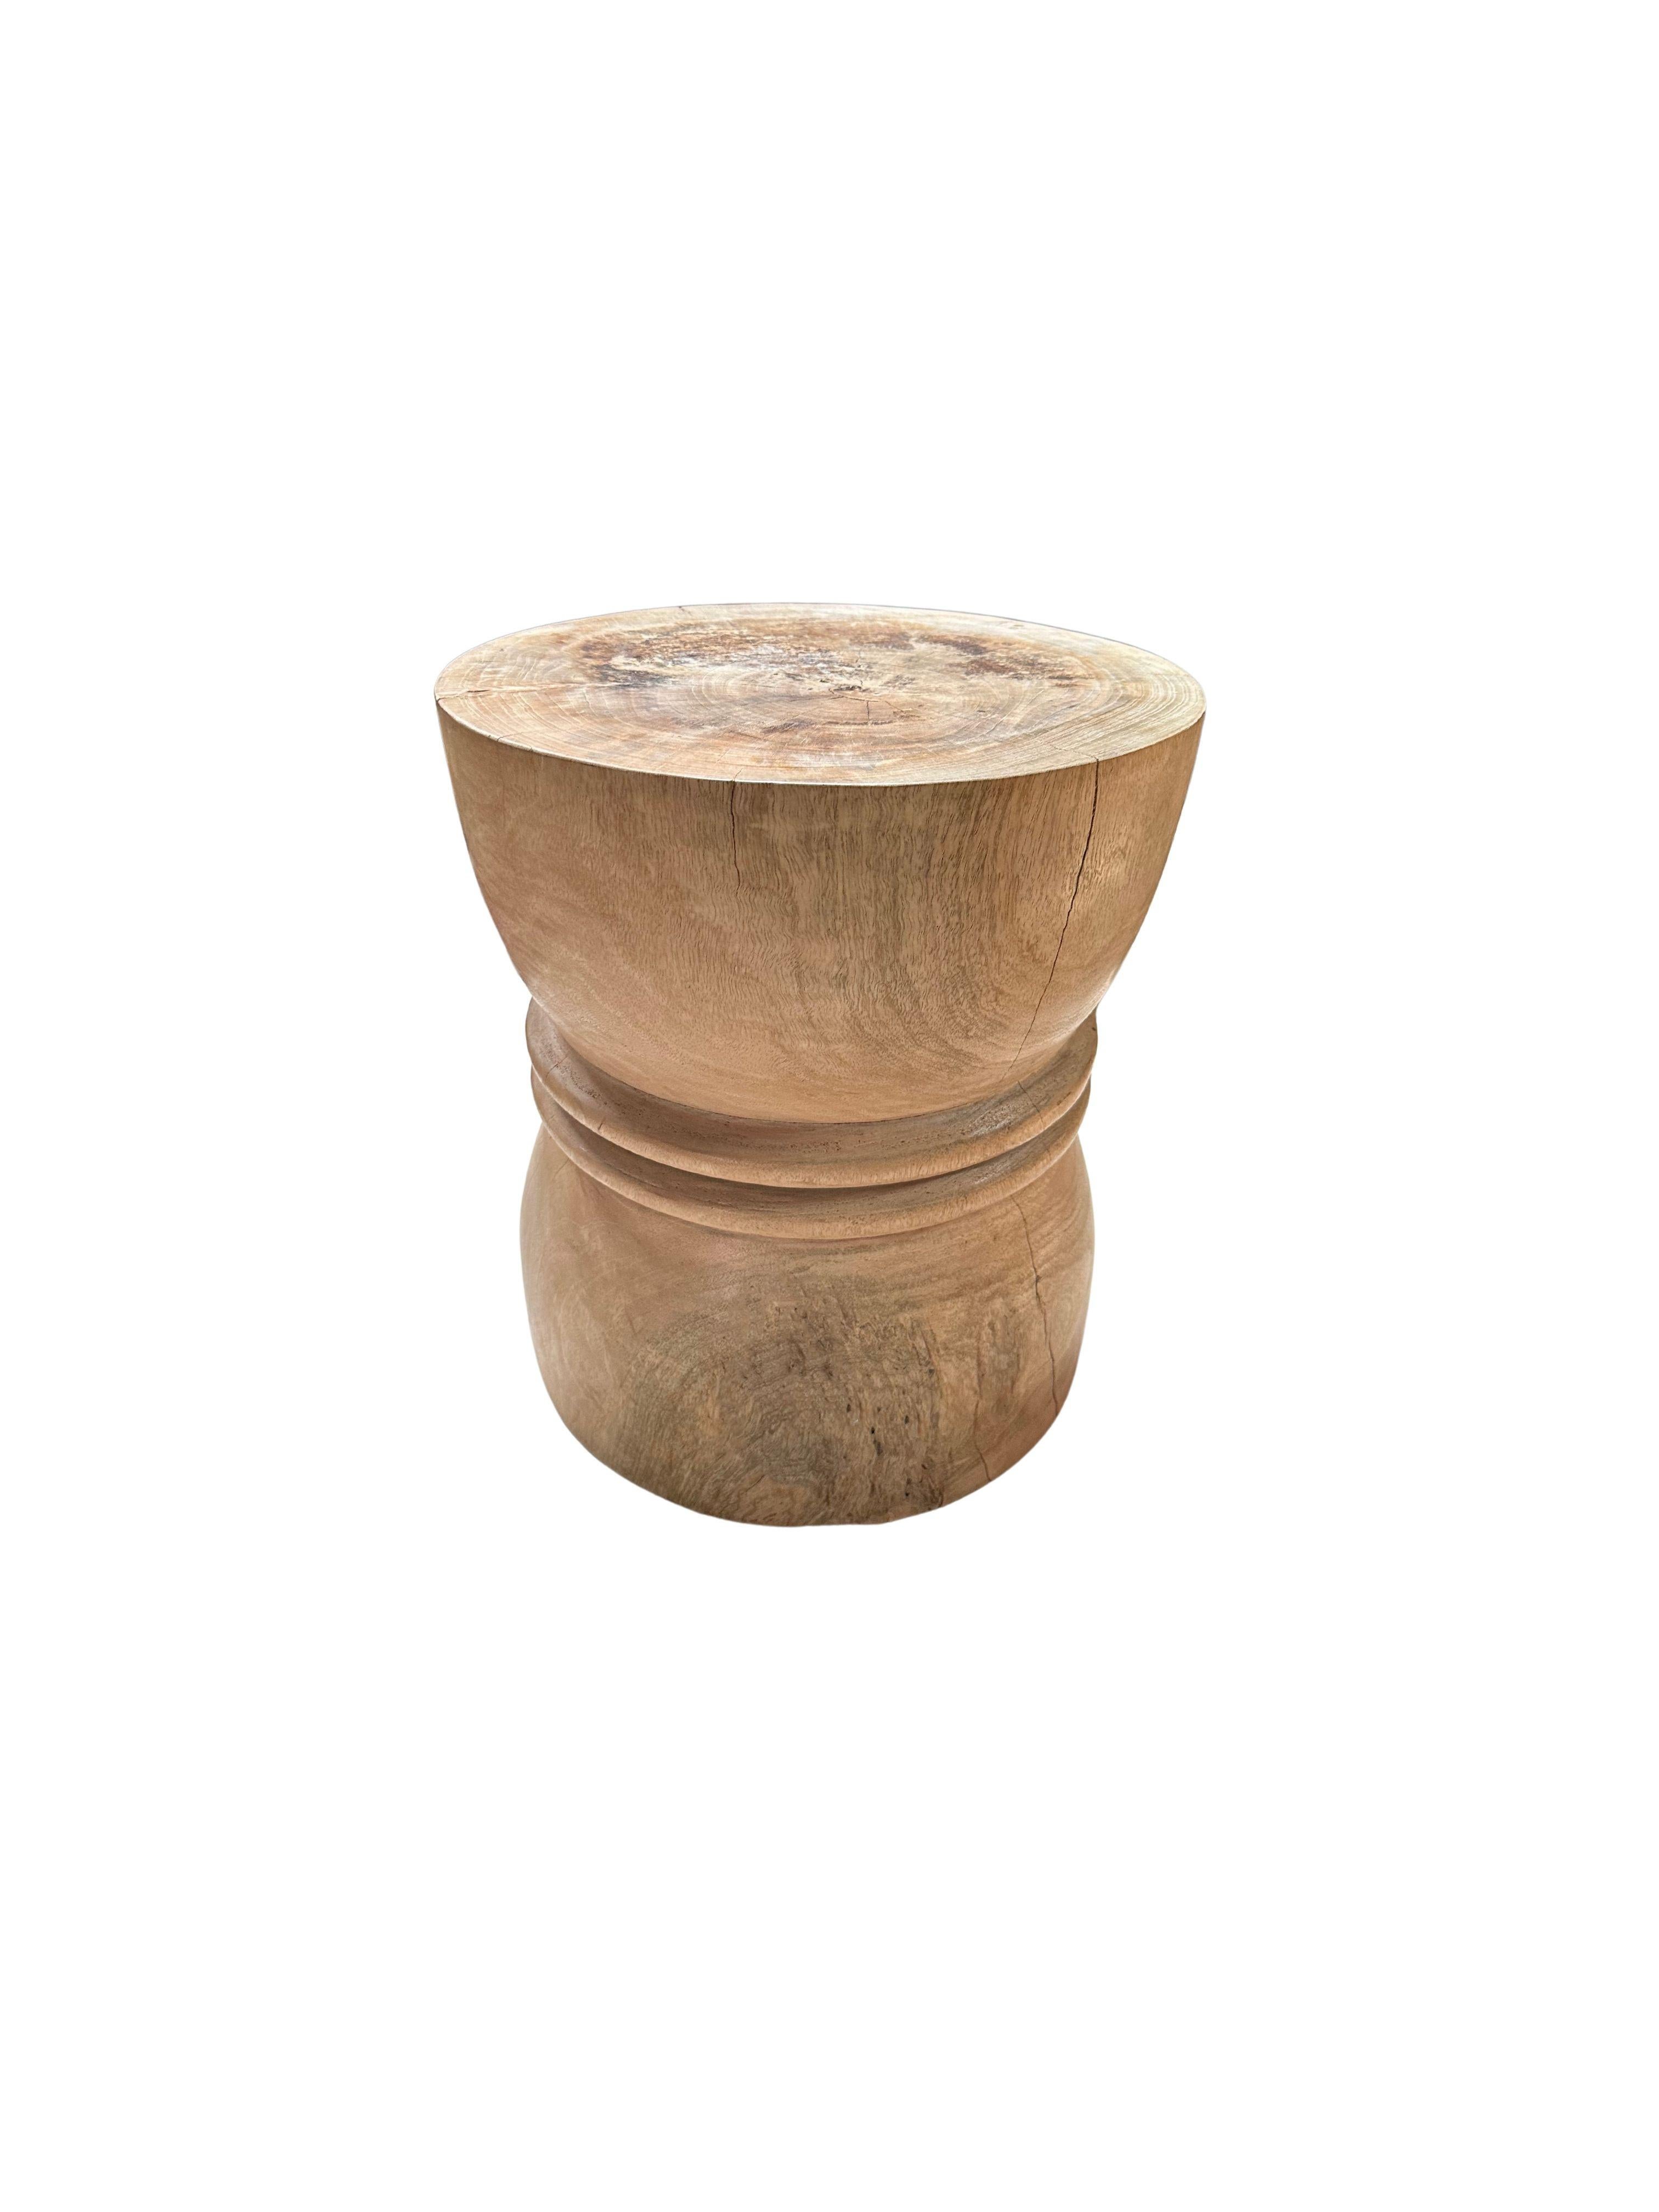 A wonderfully sculptural round side table or stool. Its neutral pigment makes it perfect for any space. A uniquely sculptural and versatile piece certain to invoke conversation. It was crafted from a solid block of mango wood and has a smooth